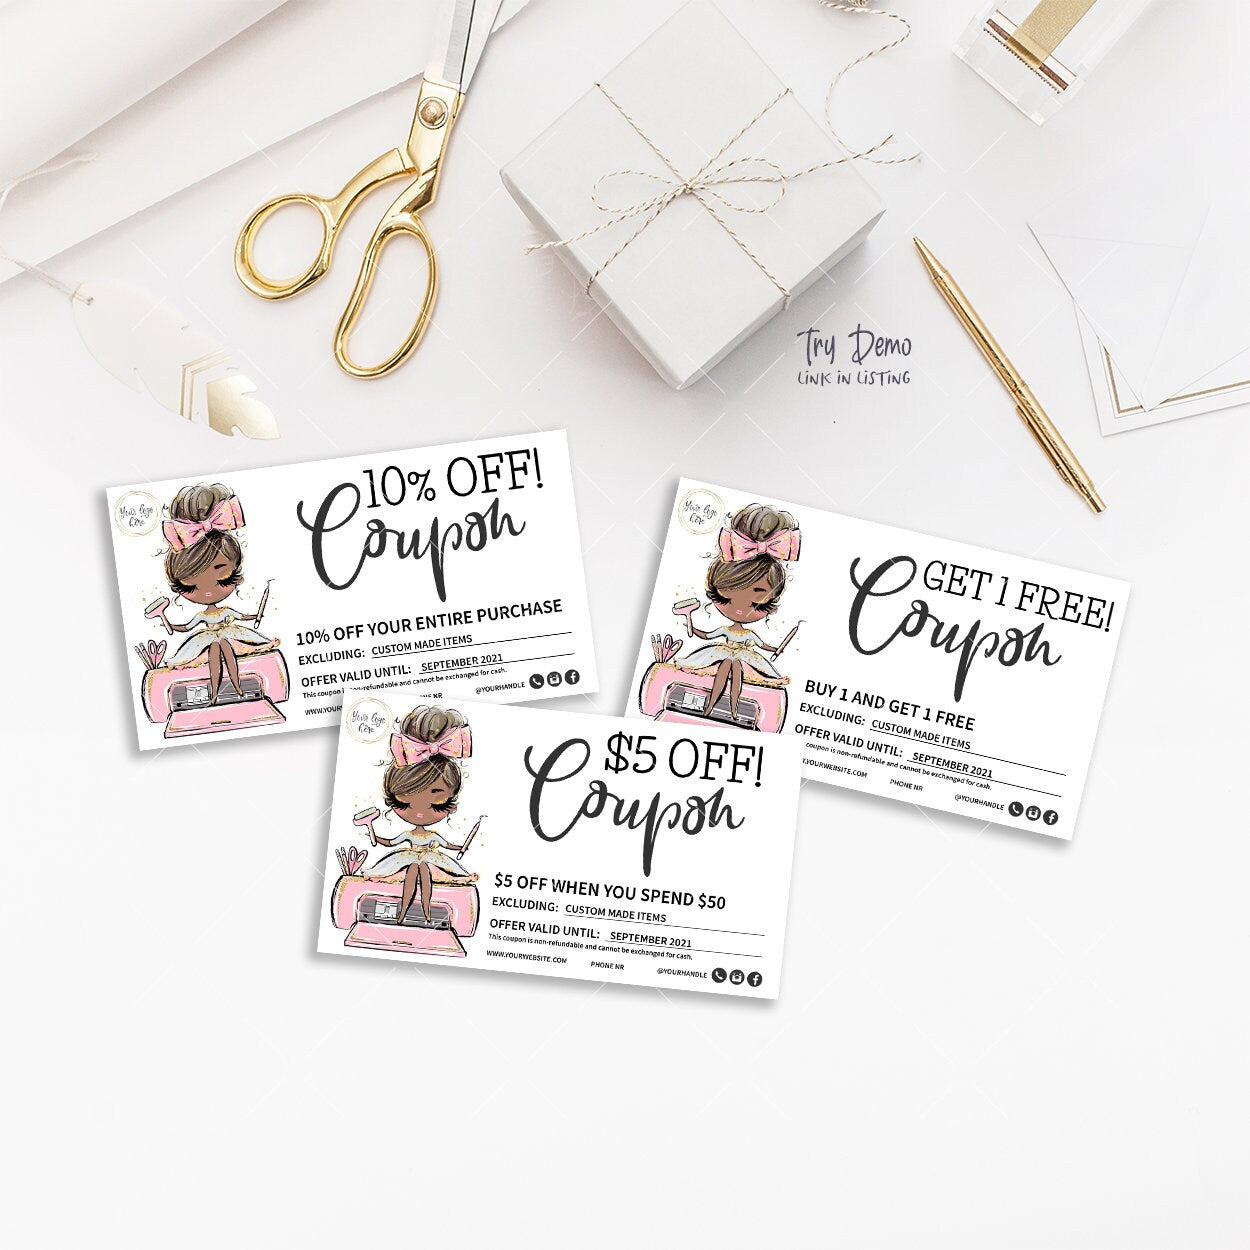 Handcrafter Business Coupons, Craft Shop Gift Cards